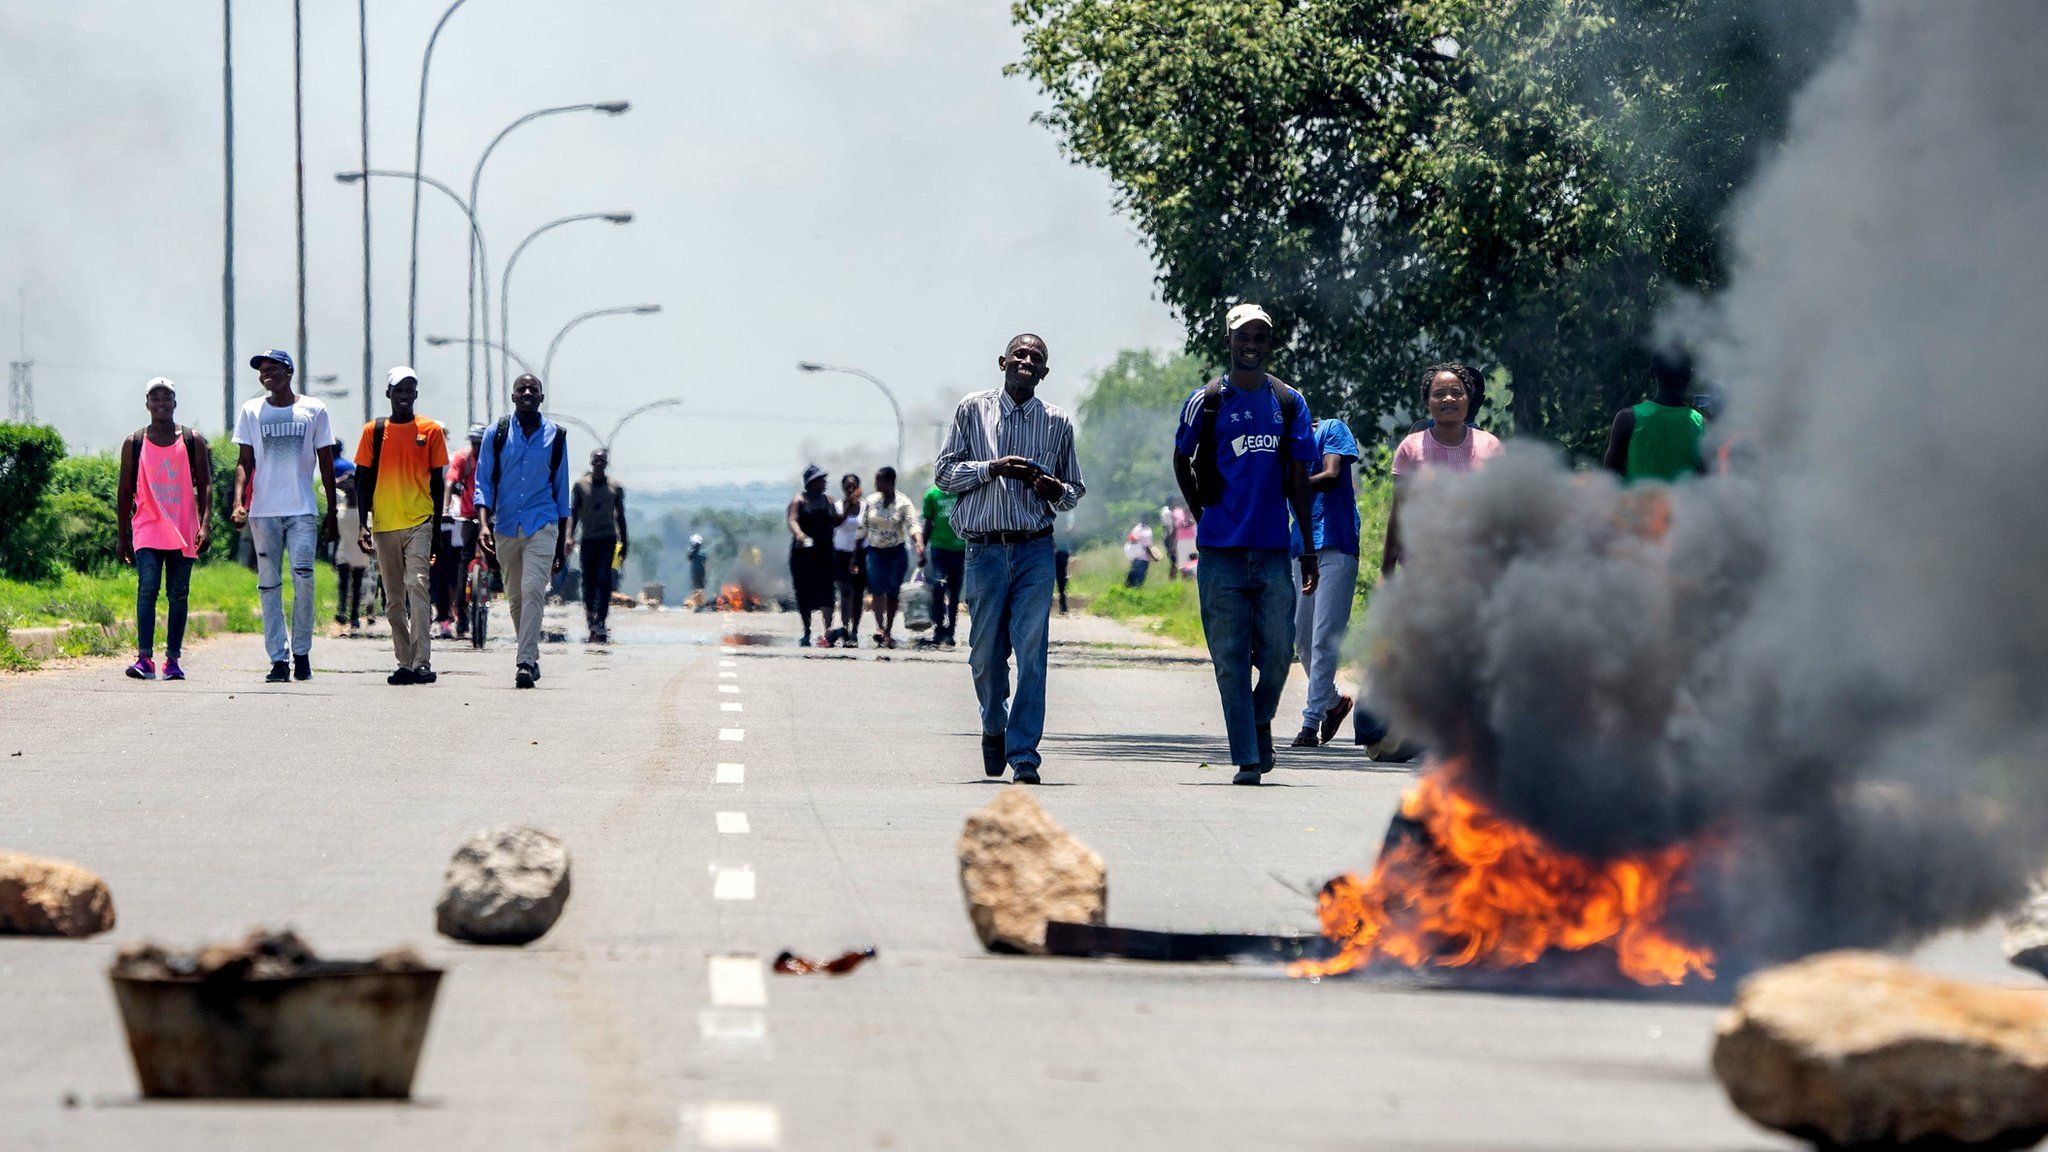 Burning barricade during a demonstration on January 14, 2019 in Bulawayo